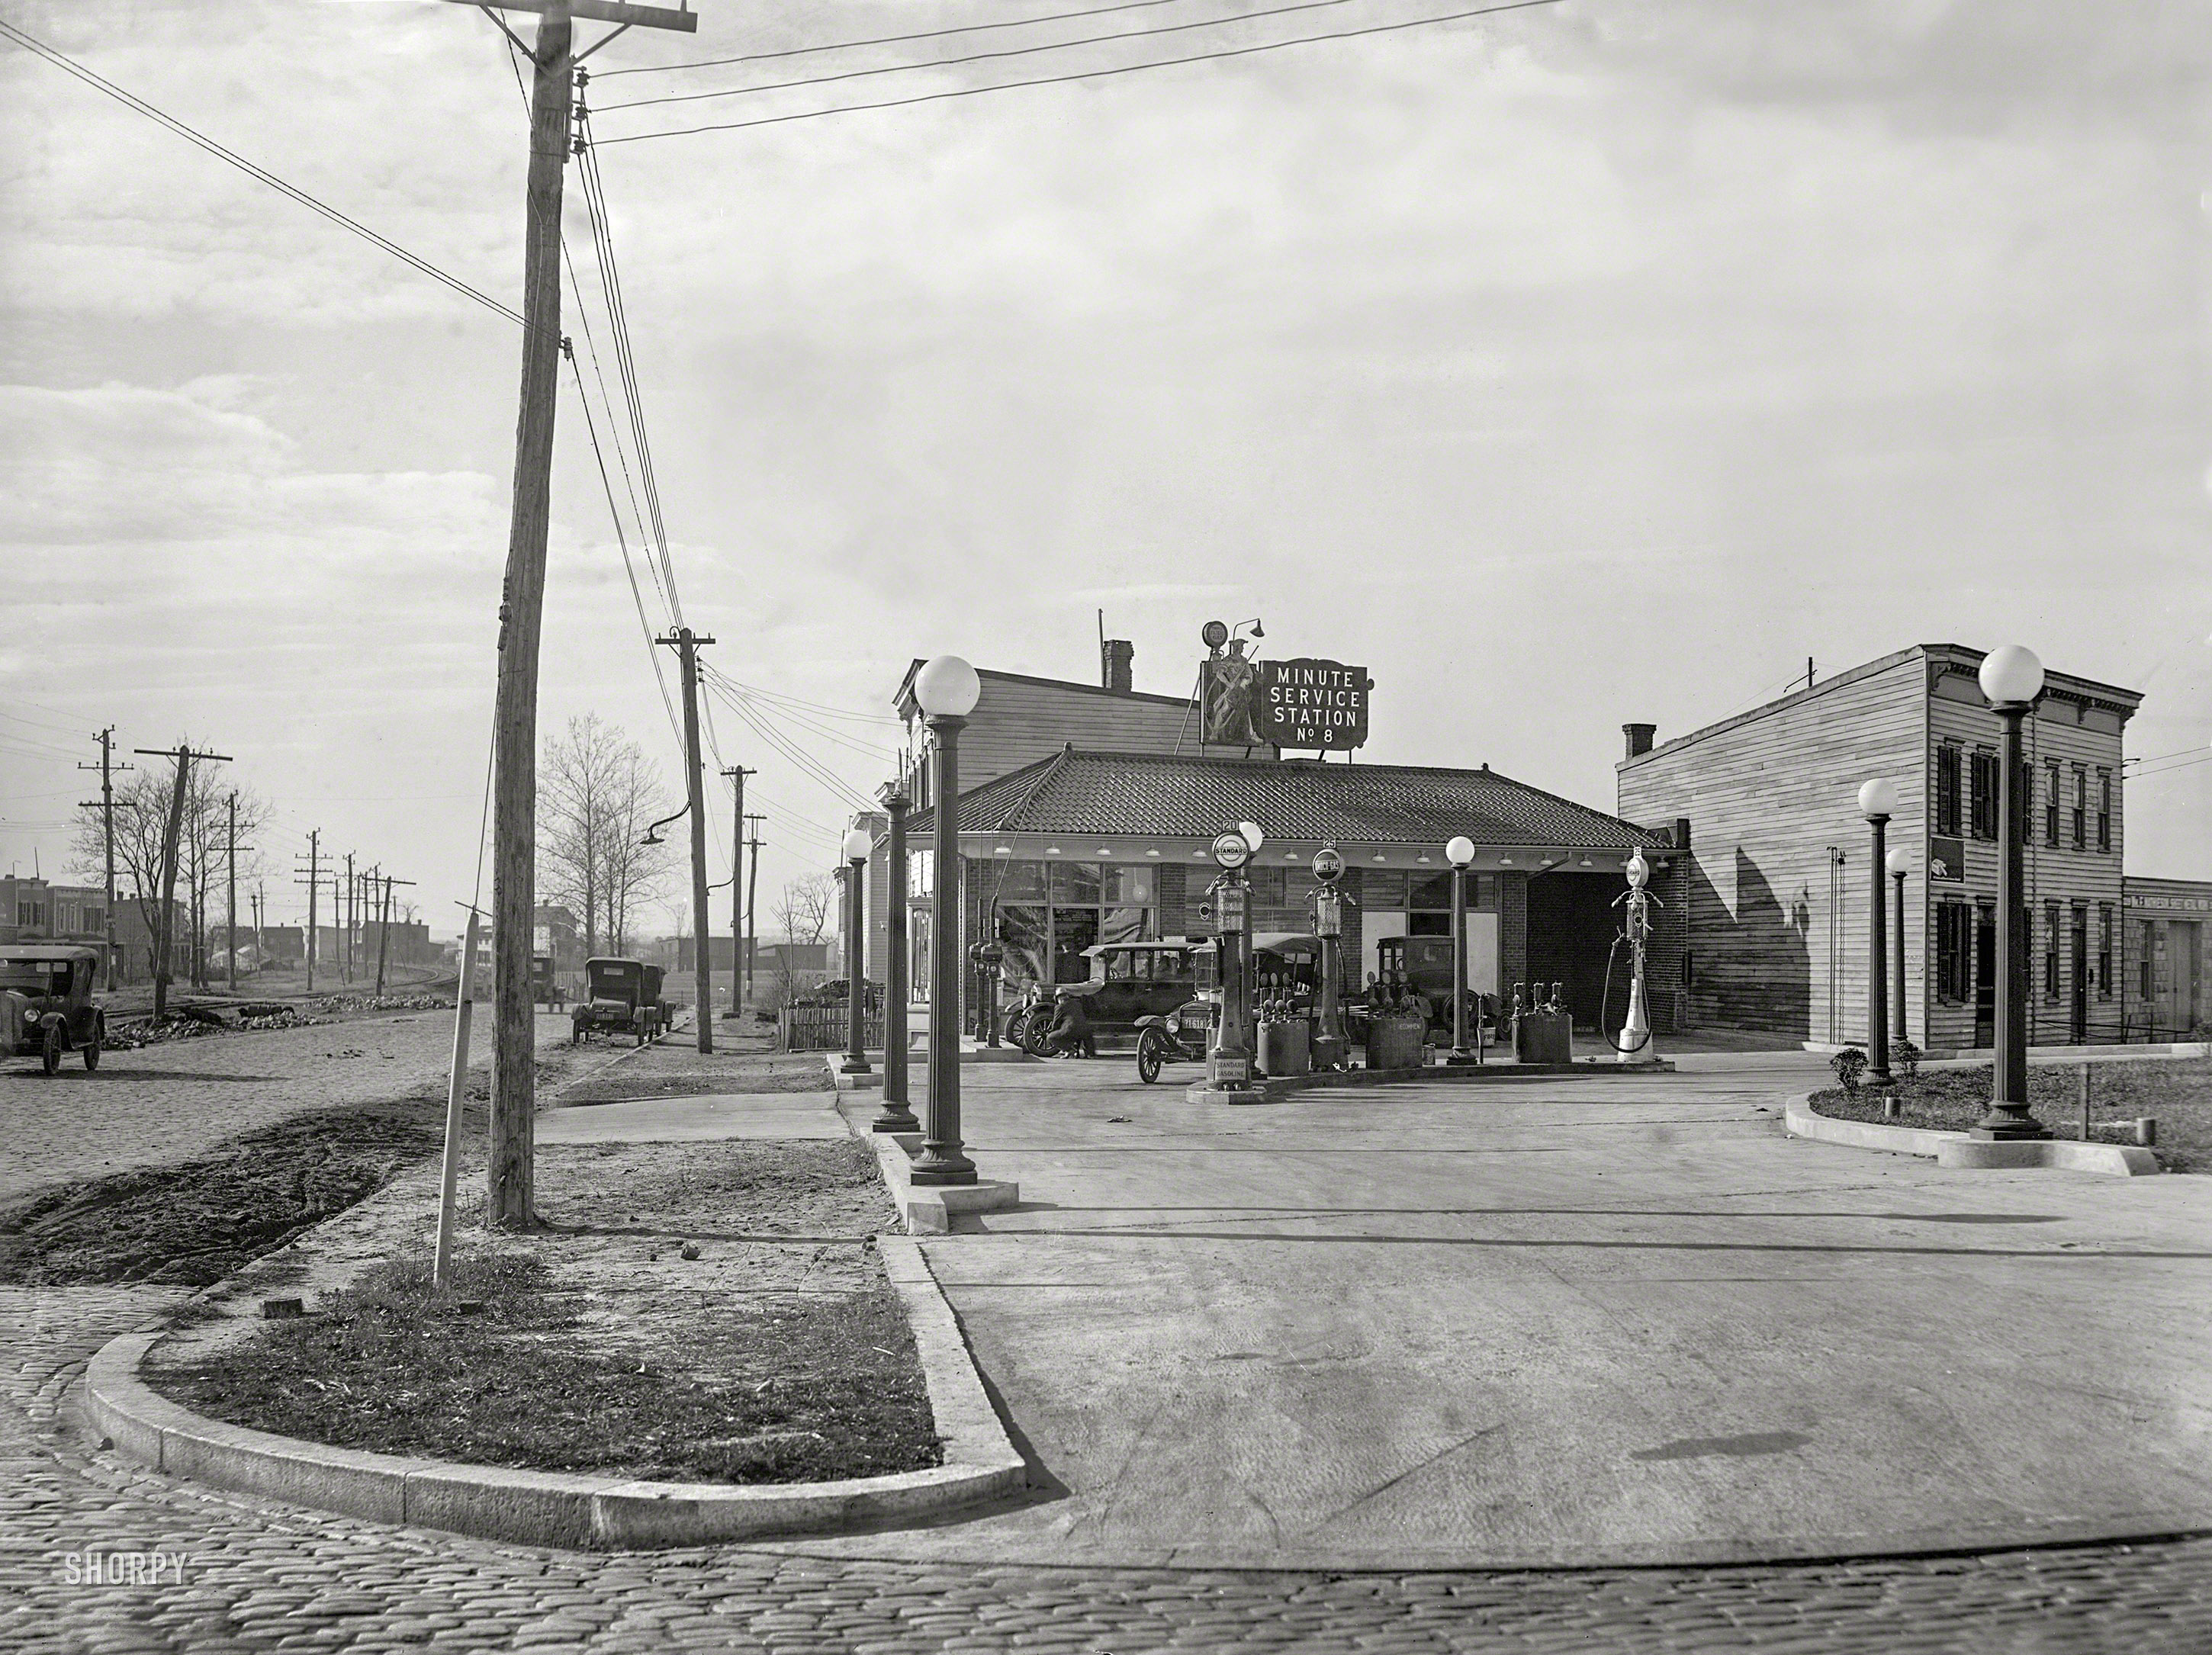 &nbsp; &nbsp; &nbsp; &nbsp; First posted here 10 years ago, and now updated with a better-quality image.
1925. Washington, D.C. "Texas Co., Minute Service Station No. 8, Twining City." Pennsylvania Avenue at Railroad Avenue S.E. near the Sousa Bridge. 8x10 inch glass negative, National Photo Company Collection. View full size.